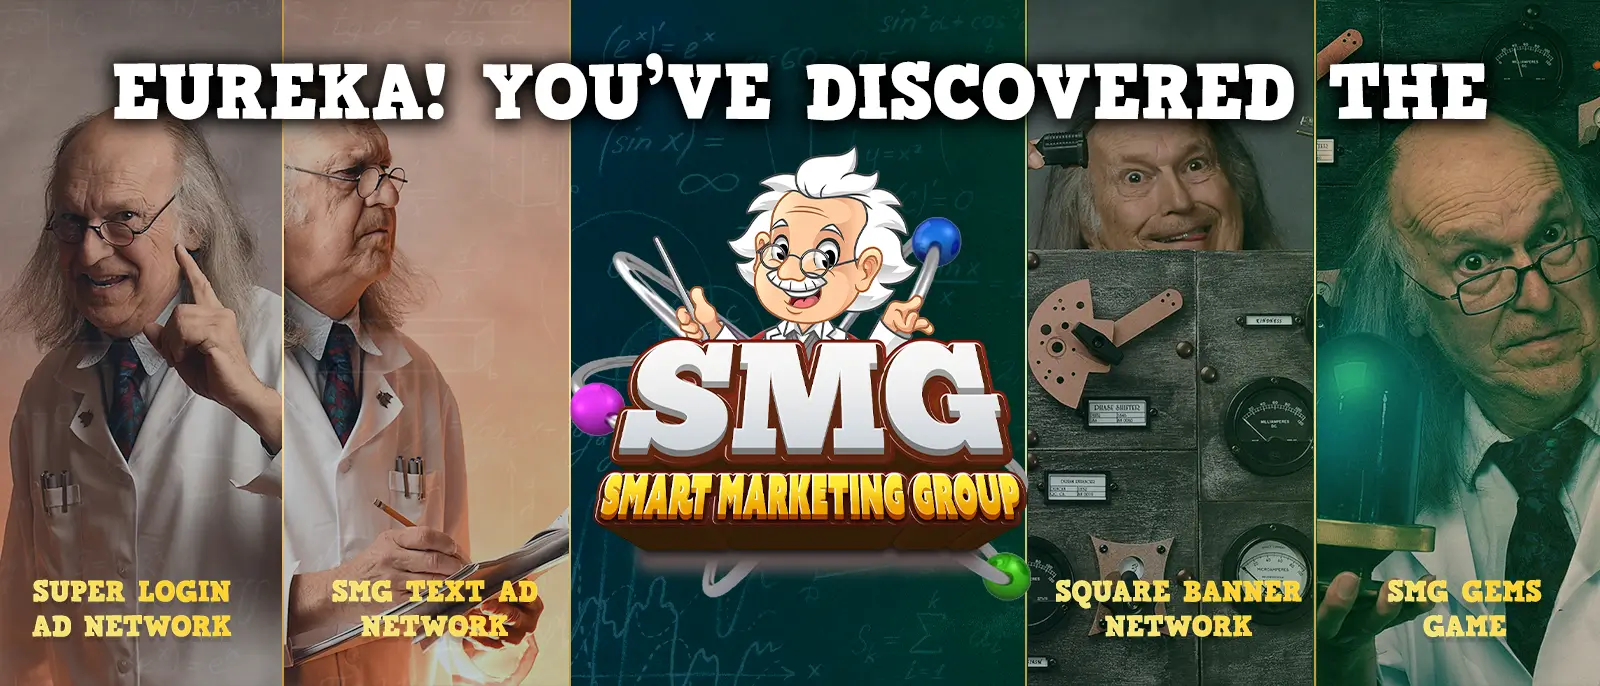 Eureka! You've Discovered the SMG Network